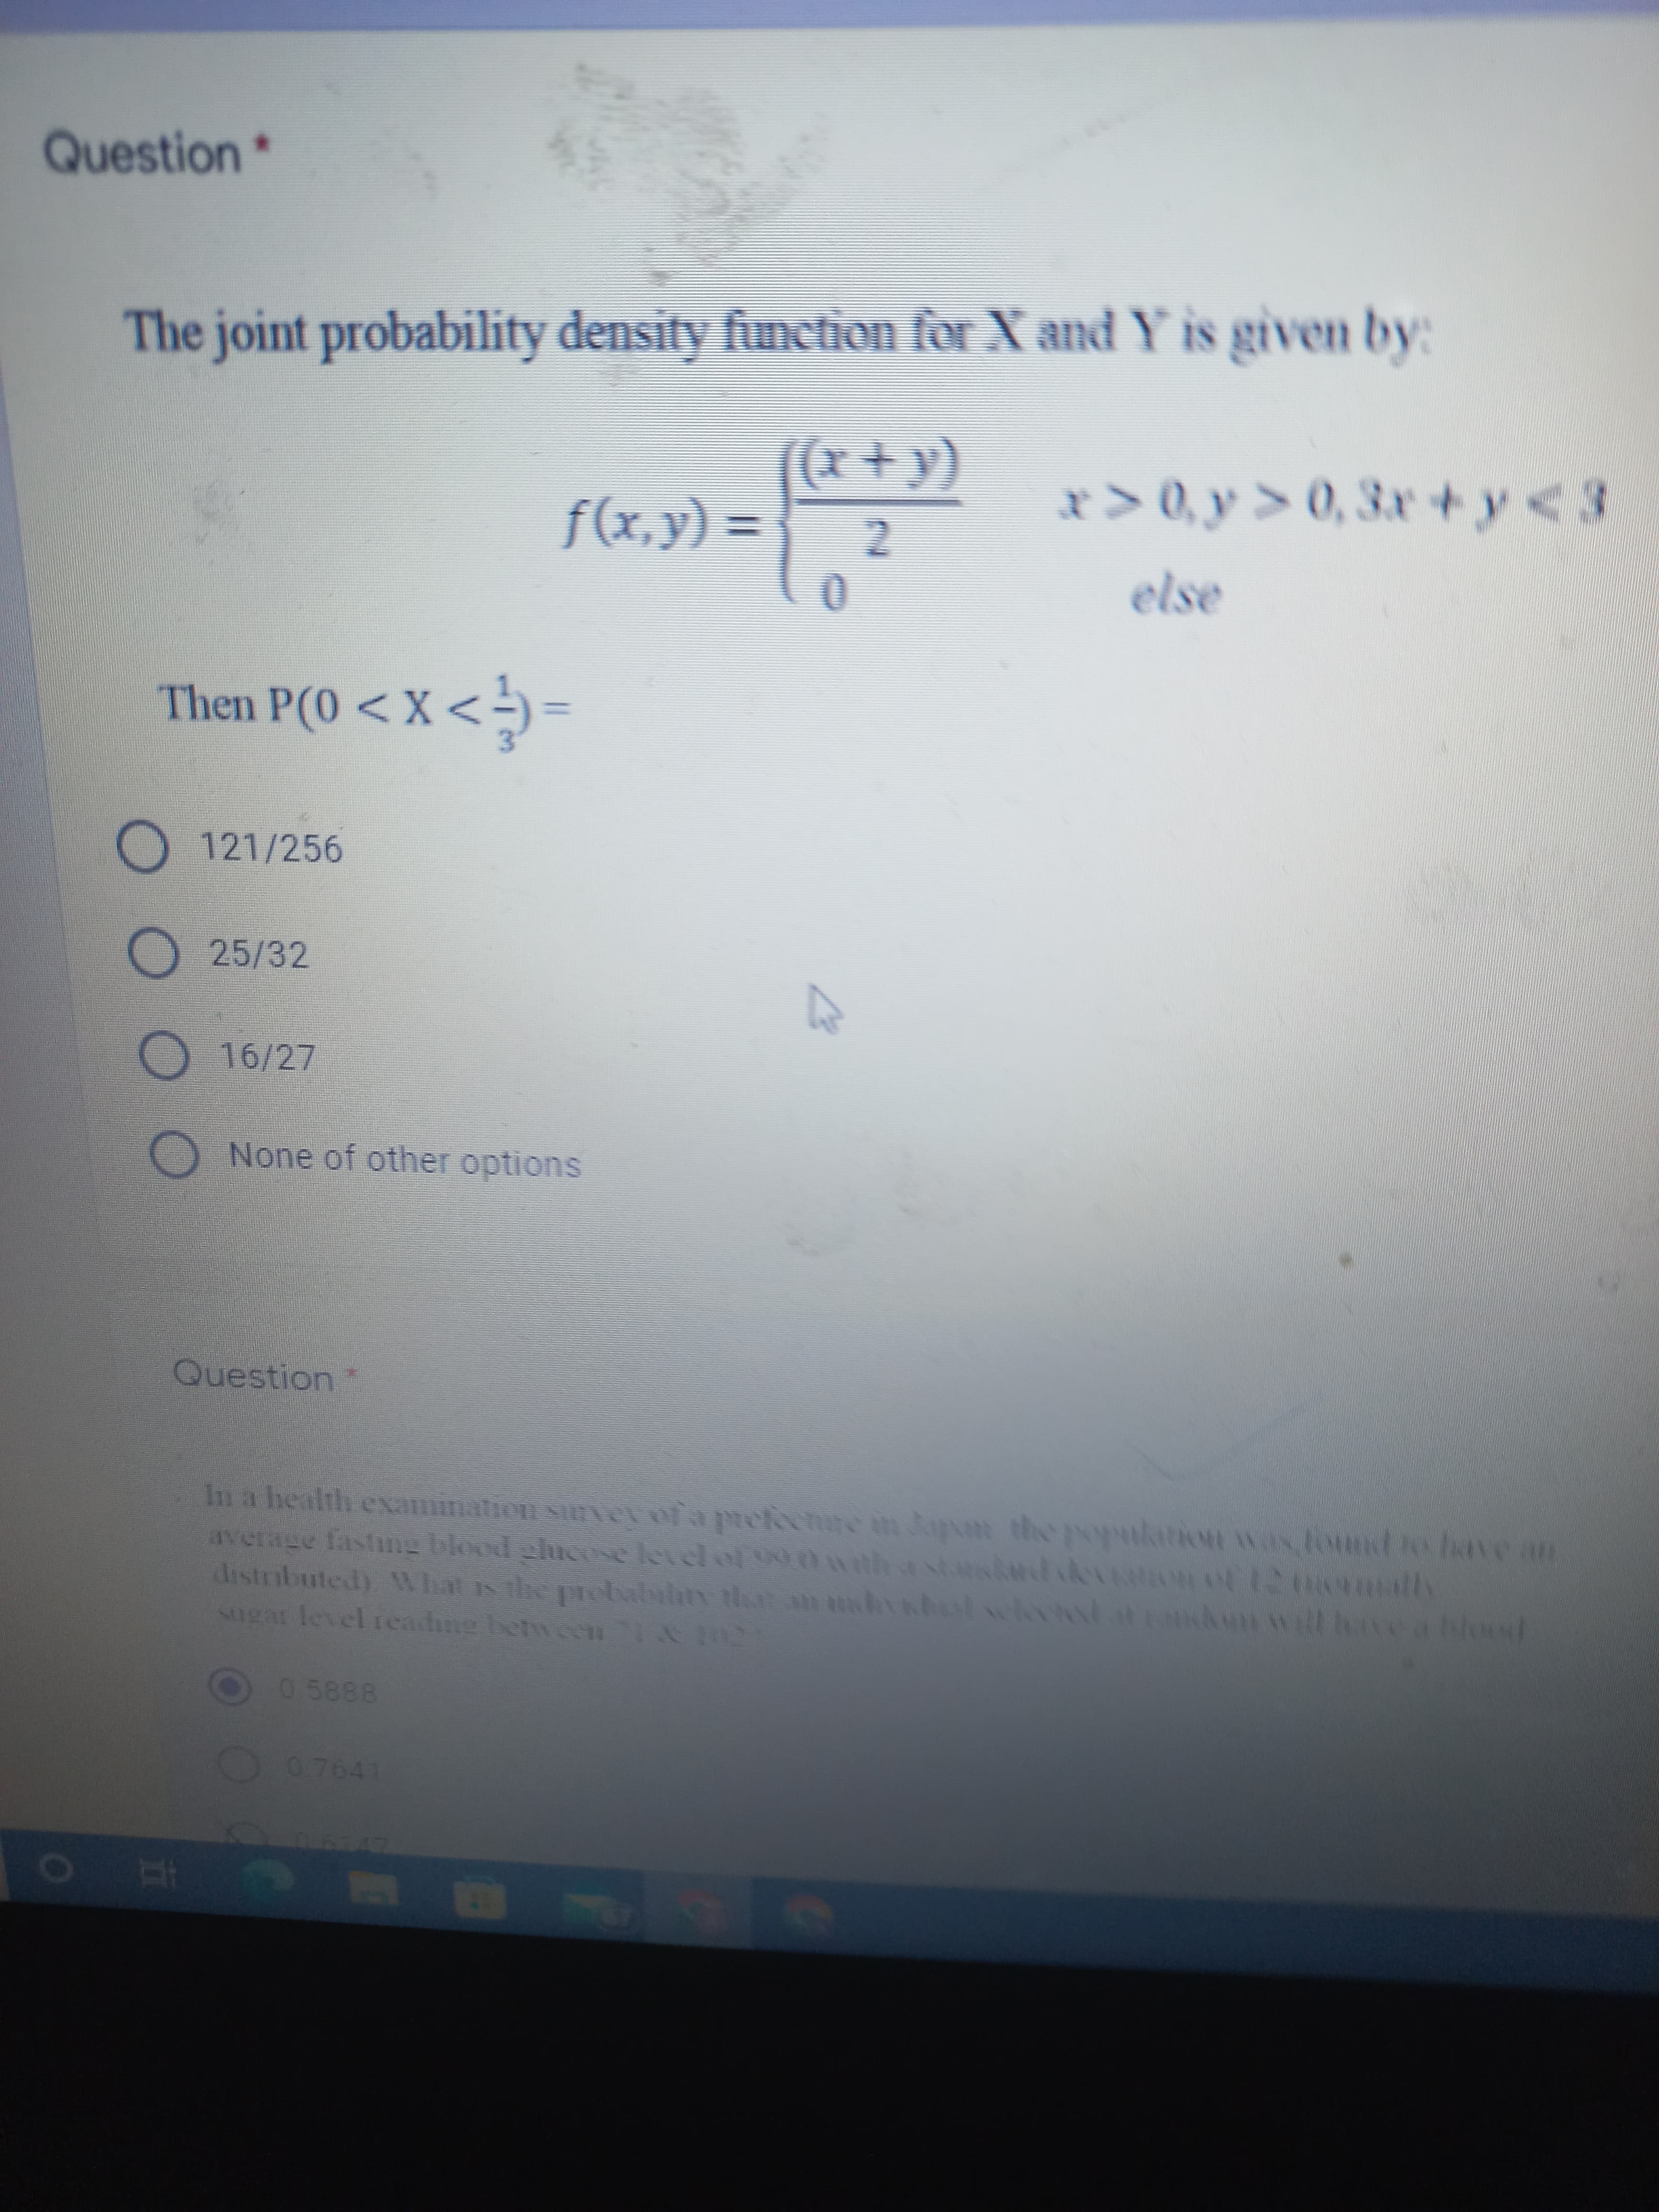 Question*
The joint probability density function for X and Y is given by:
x> 0, y > 0, 3r+y<3
f(x,y) =
Then P(0 <X<
= >x> 0)d u
O 121/256
O25/32
16/27
None of other options
Question
In a health examination siuvey ofa prefectre in pun the popularion was found to have an
average fastng blood chicose leiel of 0wathstas ot 12 0
drstributed) VWhat is
Mgar level readine betweenI
0 y
Aun will hve a blood
the pro babhty ta n m
O07641
EGO
